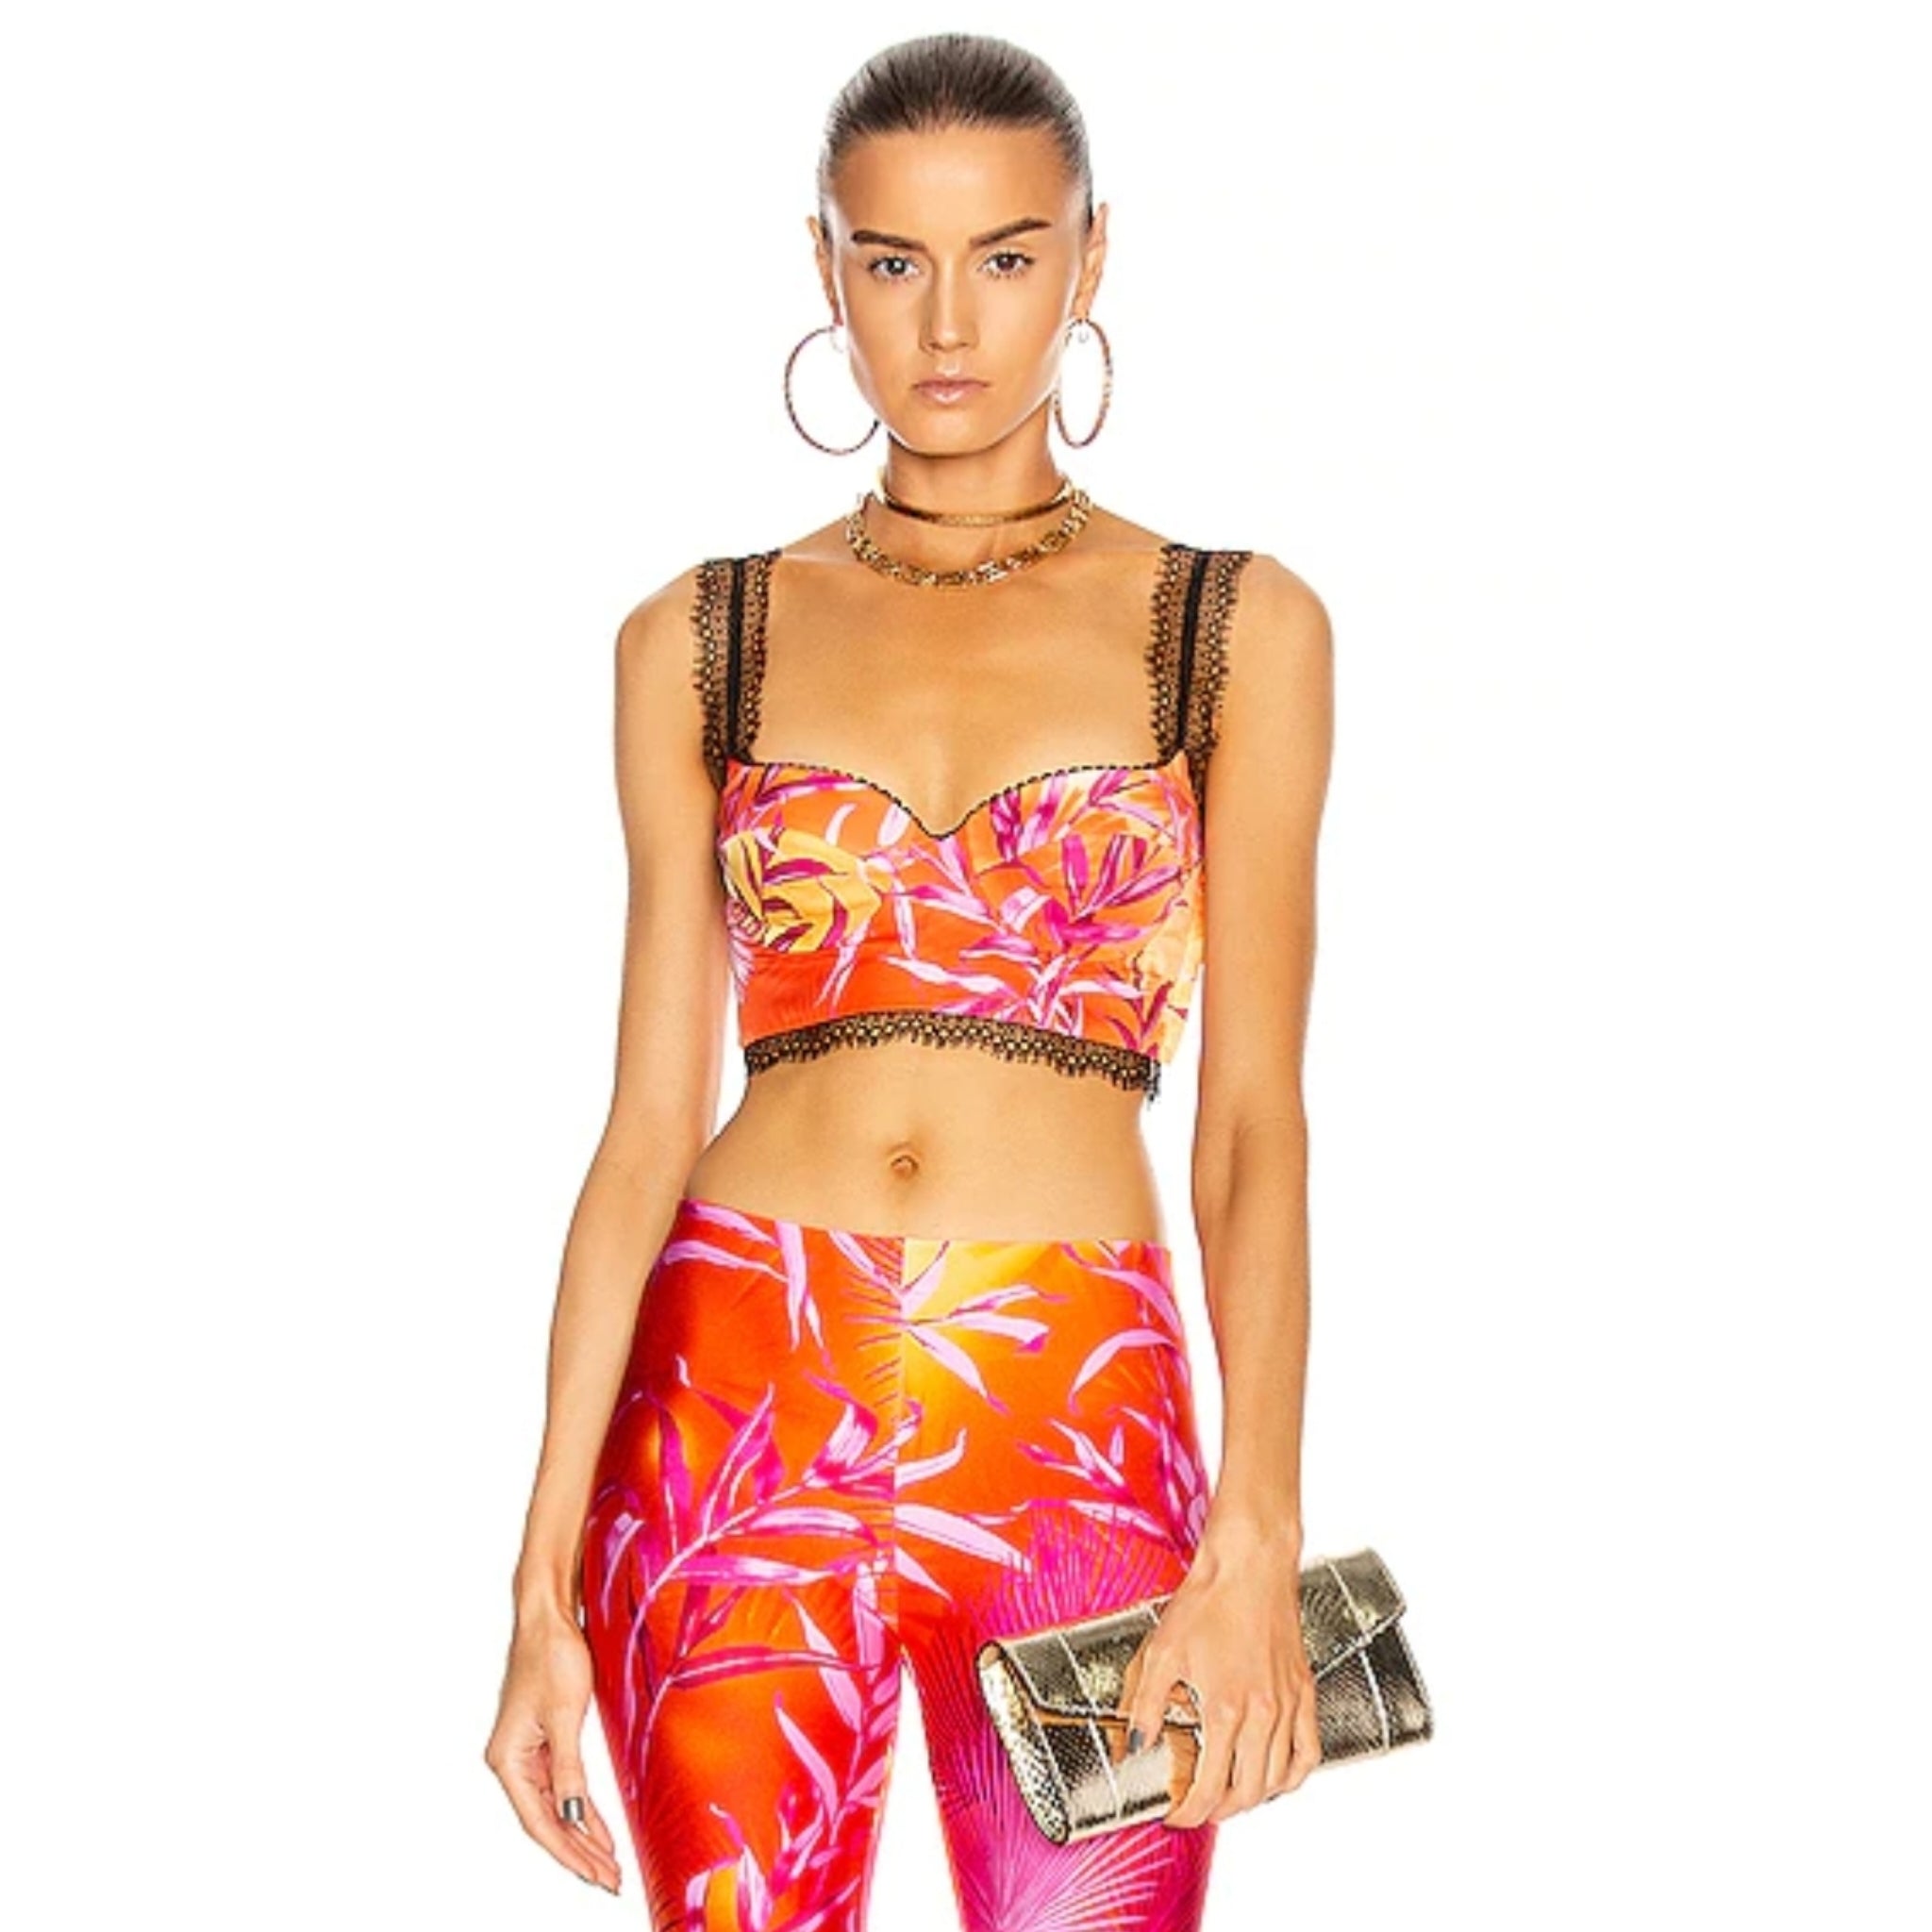 Versace Pink Jungle Print Bralette / Bustier Top – The Ultimate